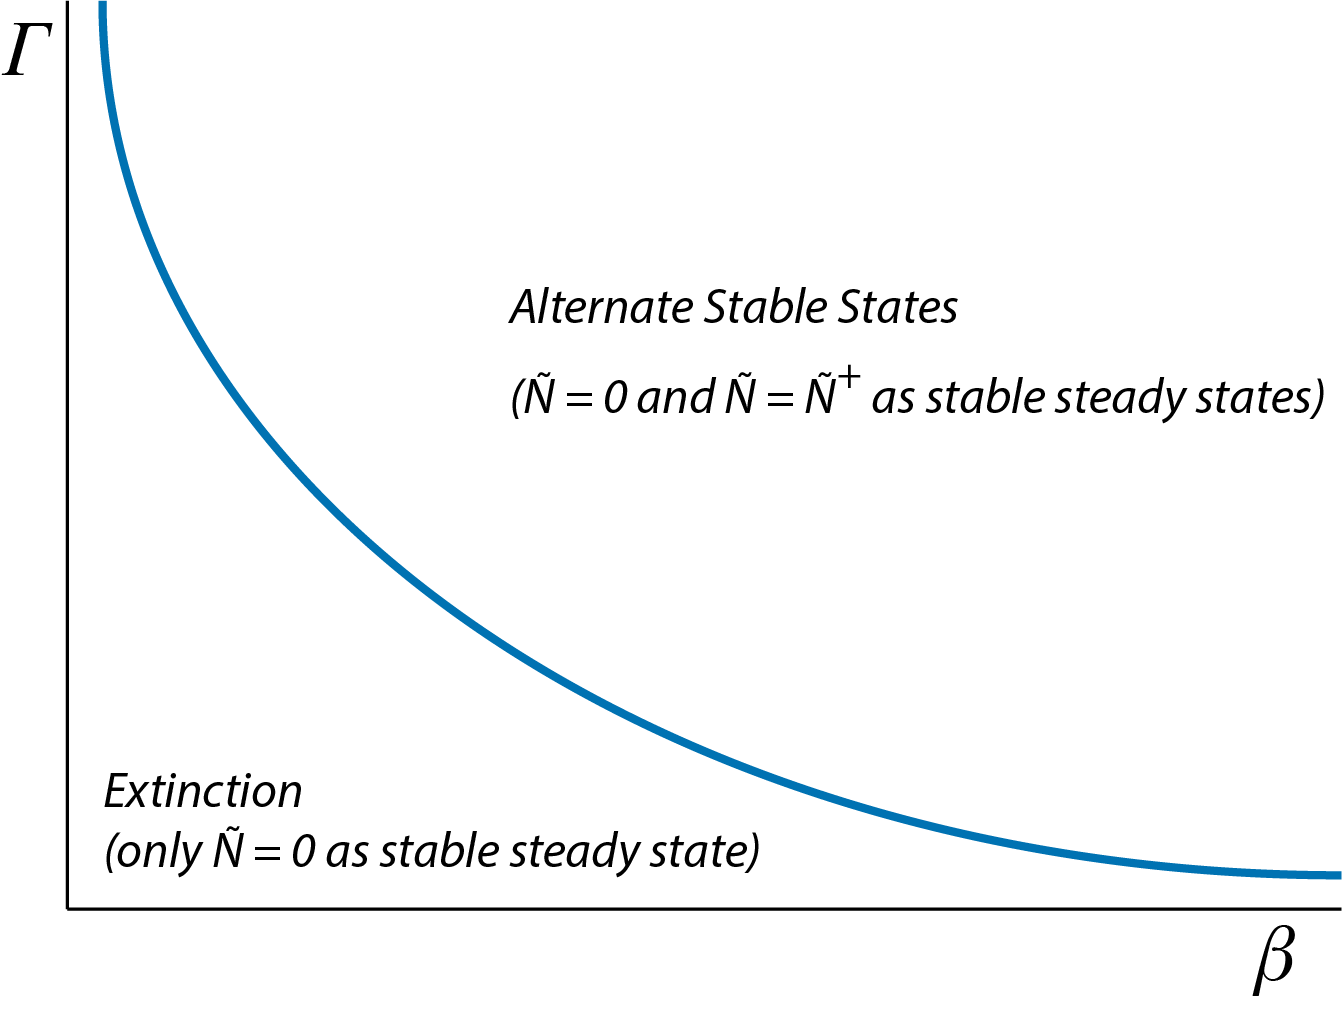 Two-parameter graph of dynamical regimes for the two-sexes population model, showing the combinations of parameter values for $\beta$ and $\Gamma$ for which either extinction occurs ($\tilde{N}=0$ is the only stable steady state of the population dynamics) or alternate steady states occur (both $\tilde{N}=0$ and $\tilde{N}=\tilde{N}^{+}$ are stable steady states of the population dynamics).